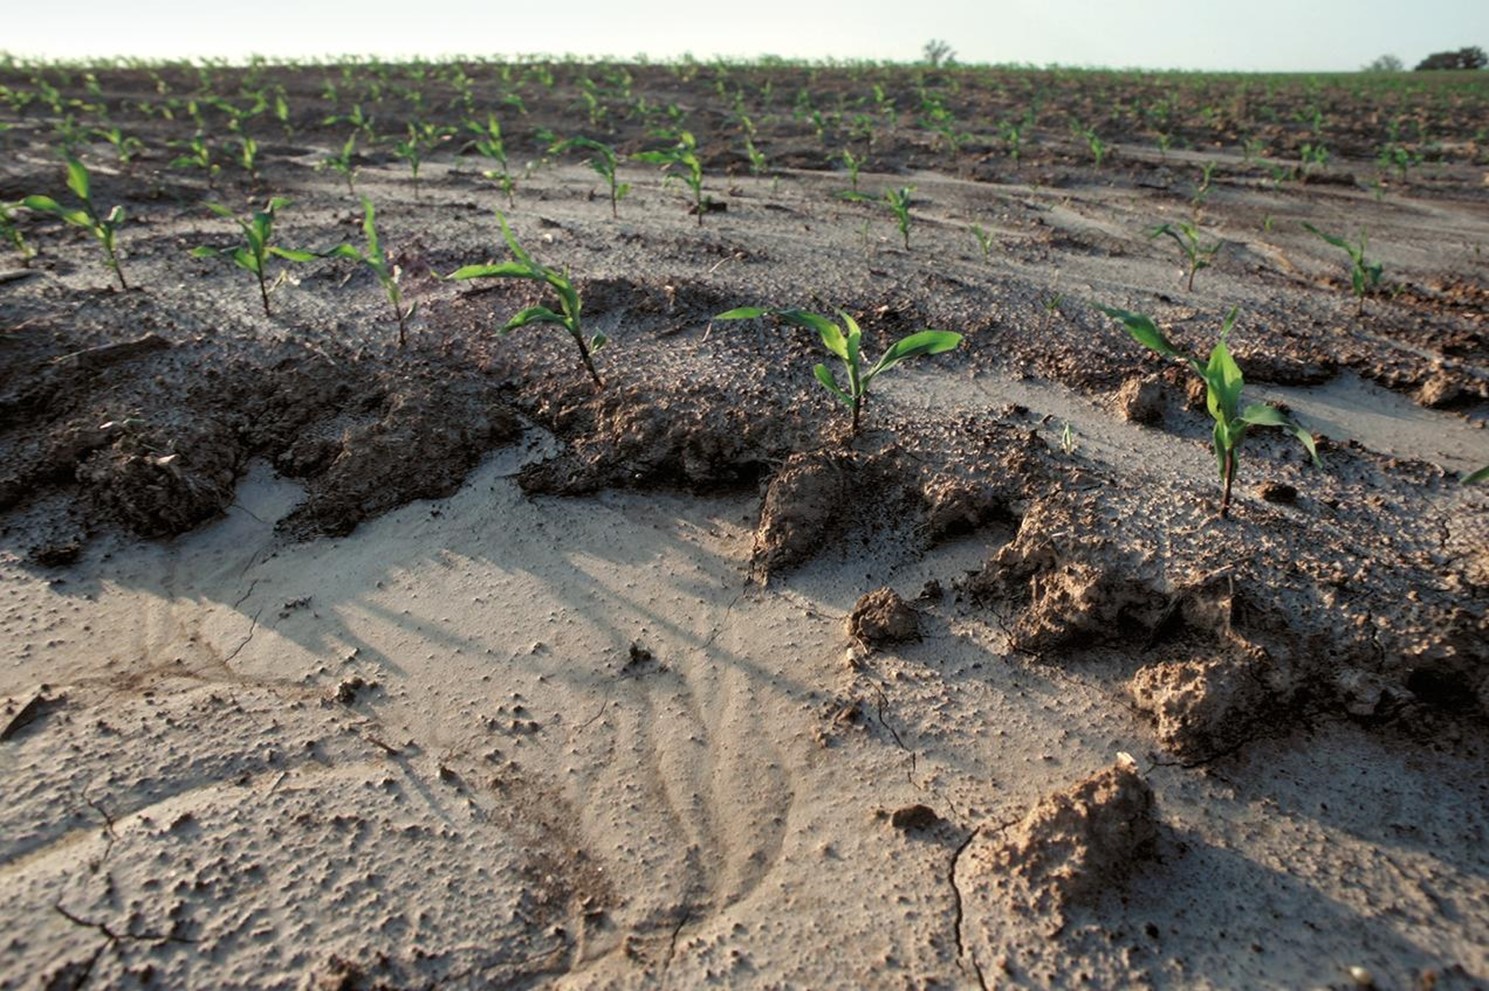 Erosion in a unprotected Tennesse cornfield following a brief storm